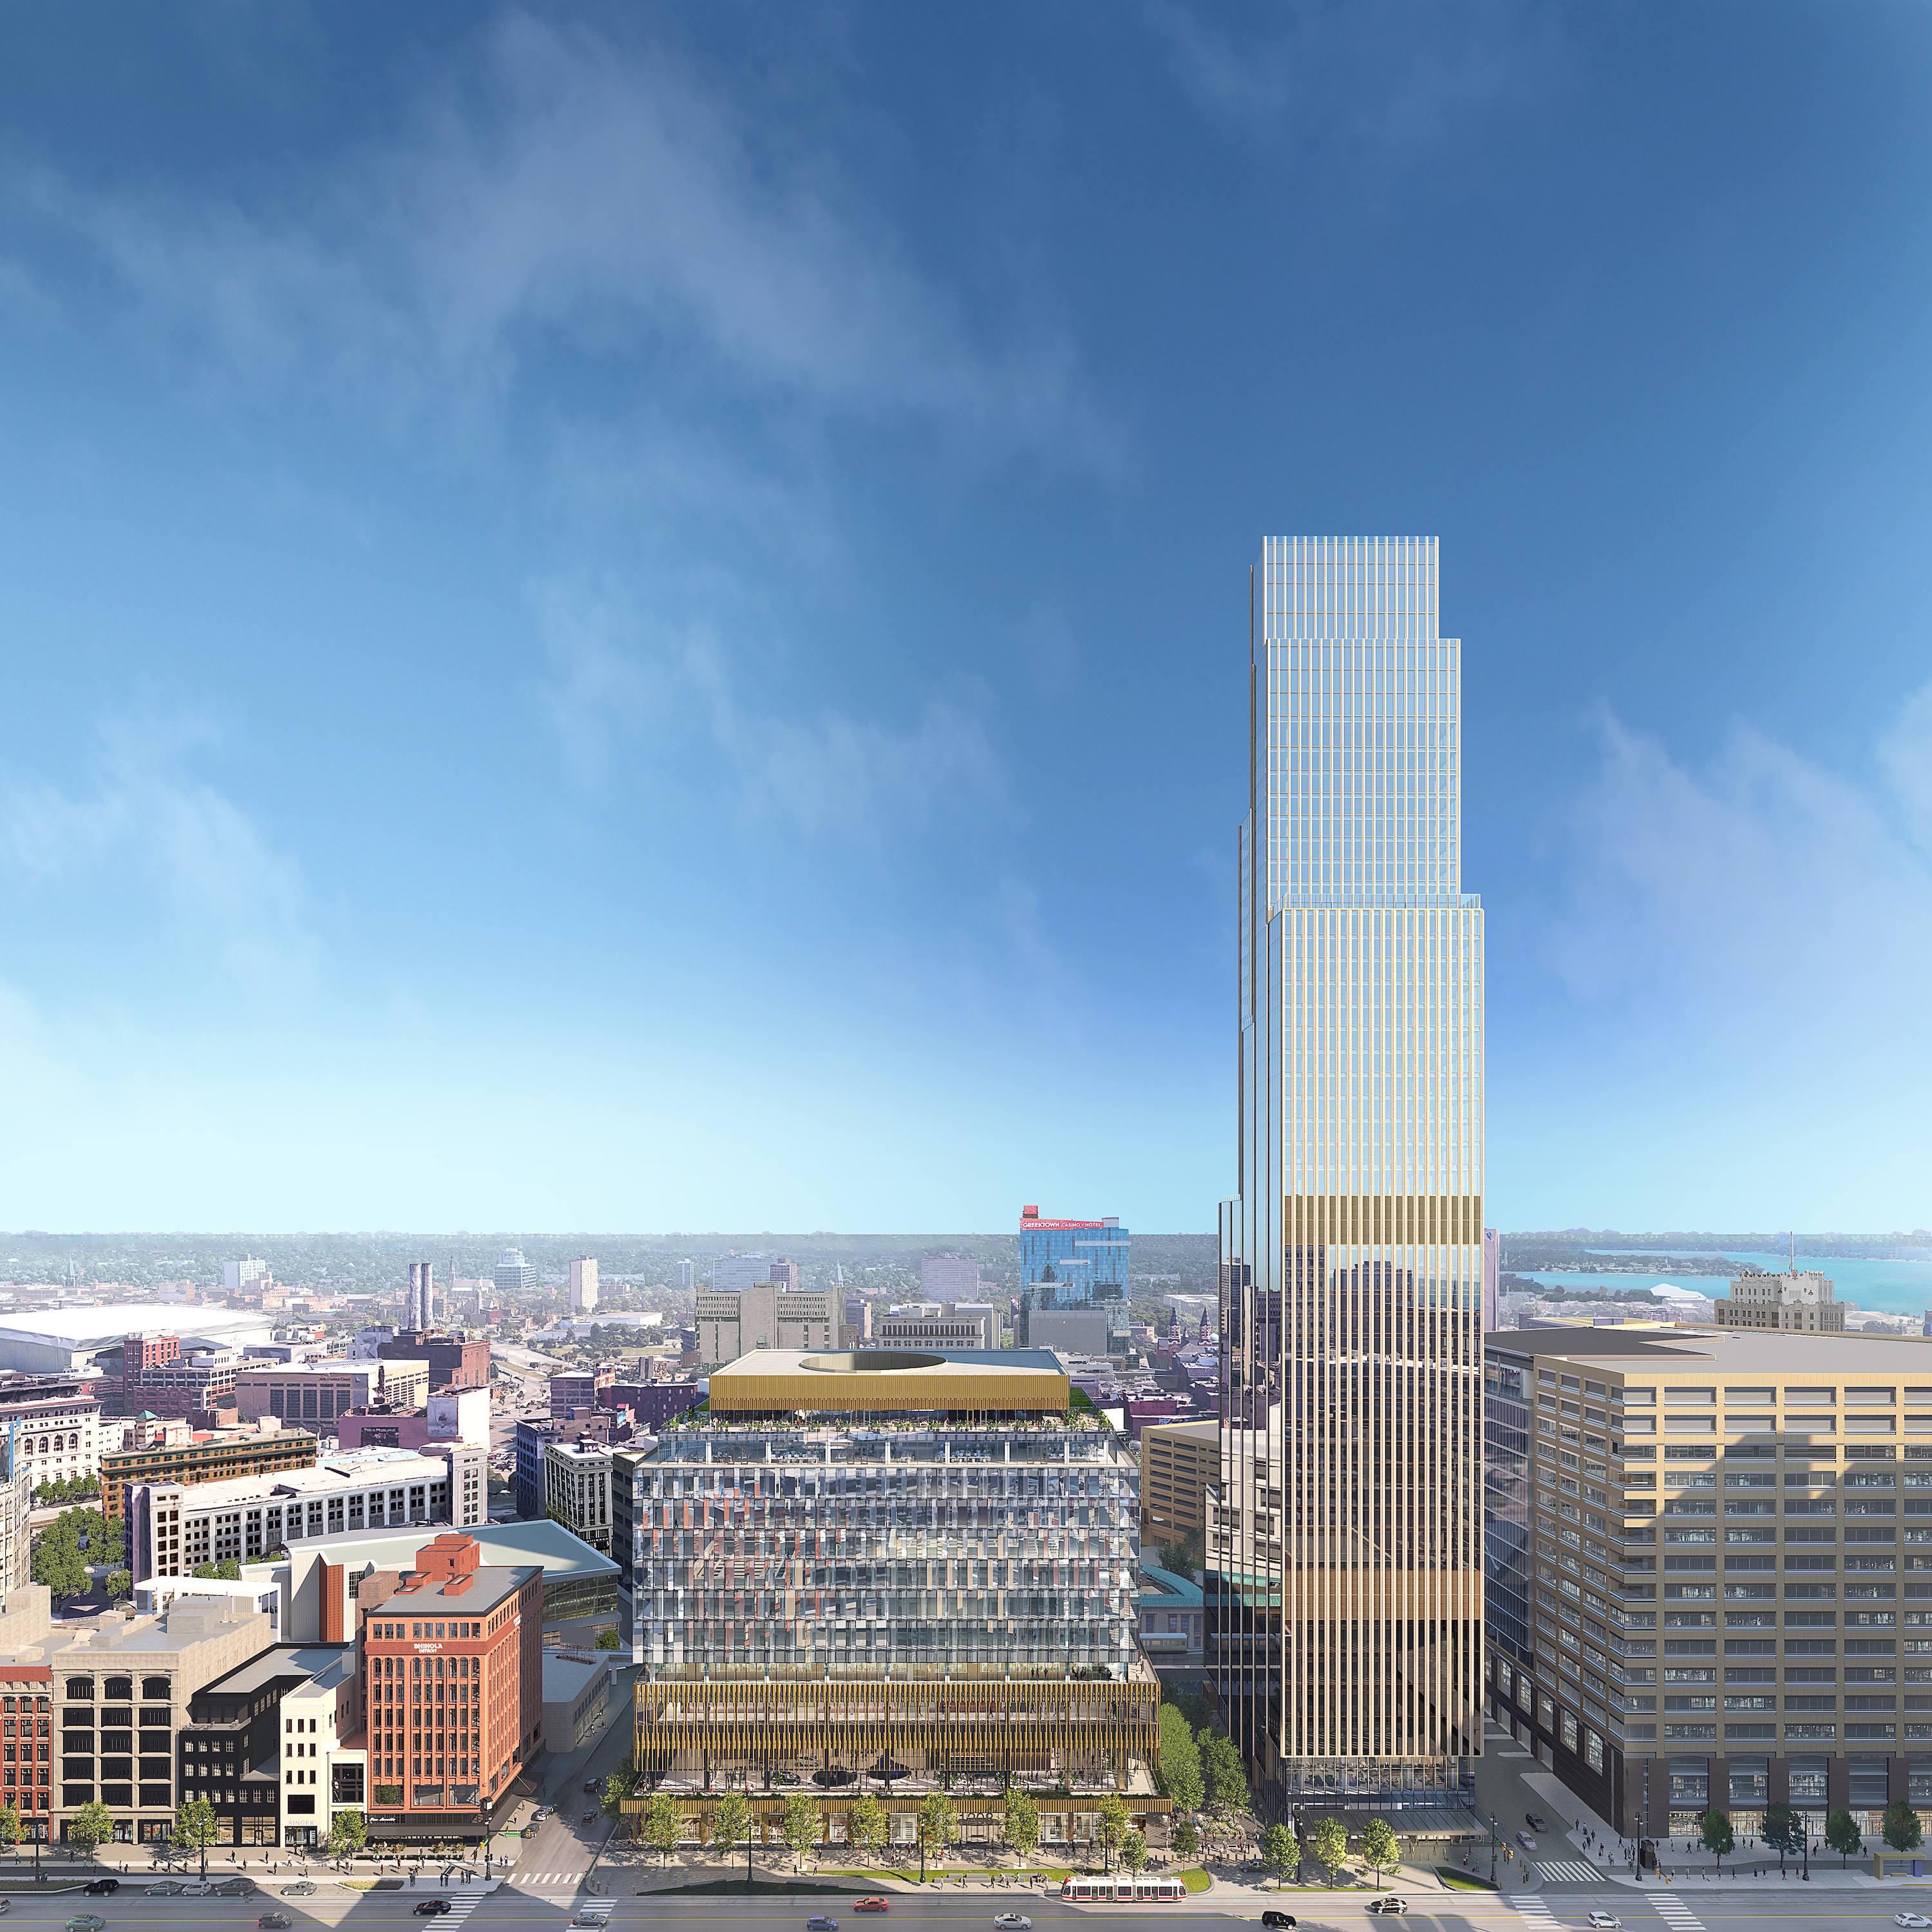 rendering of a large glass tower next to a smaller office building